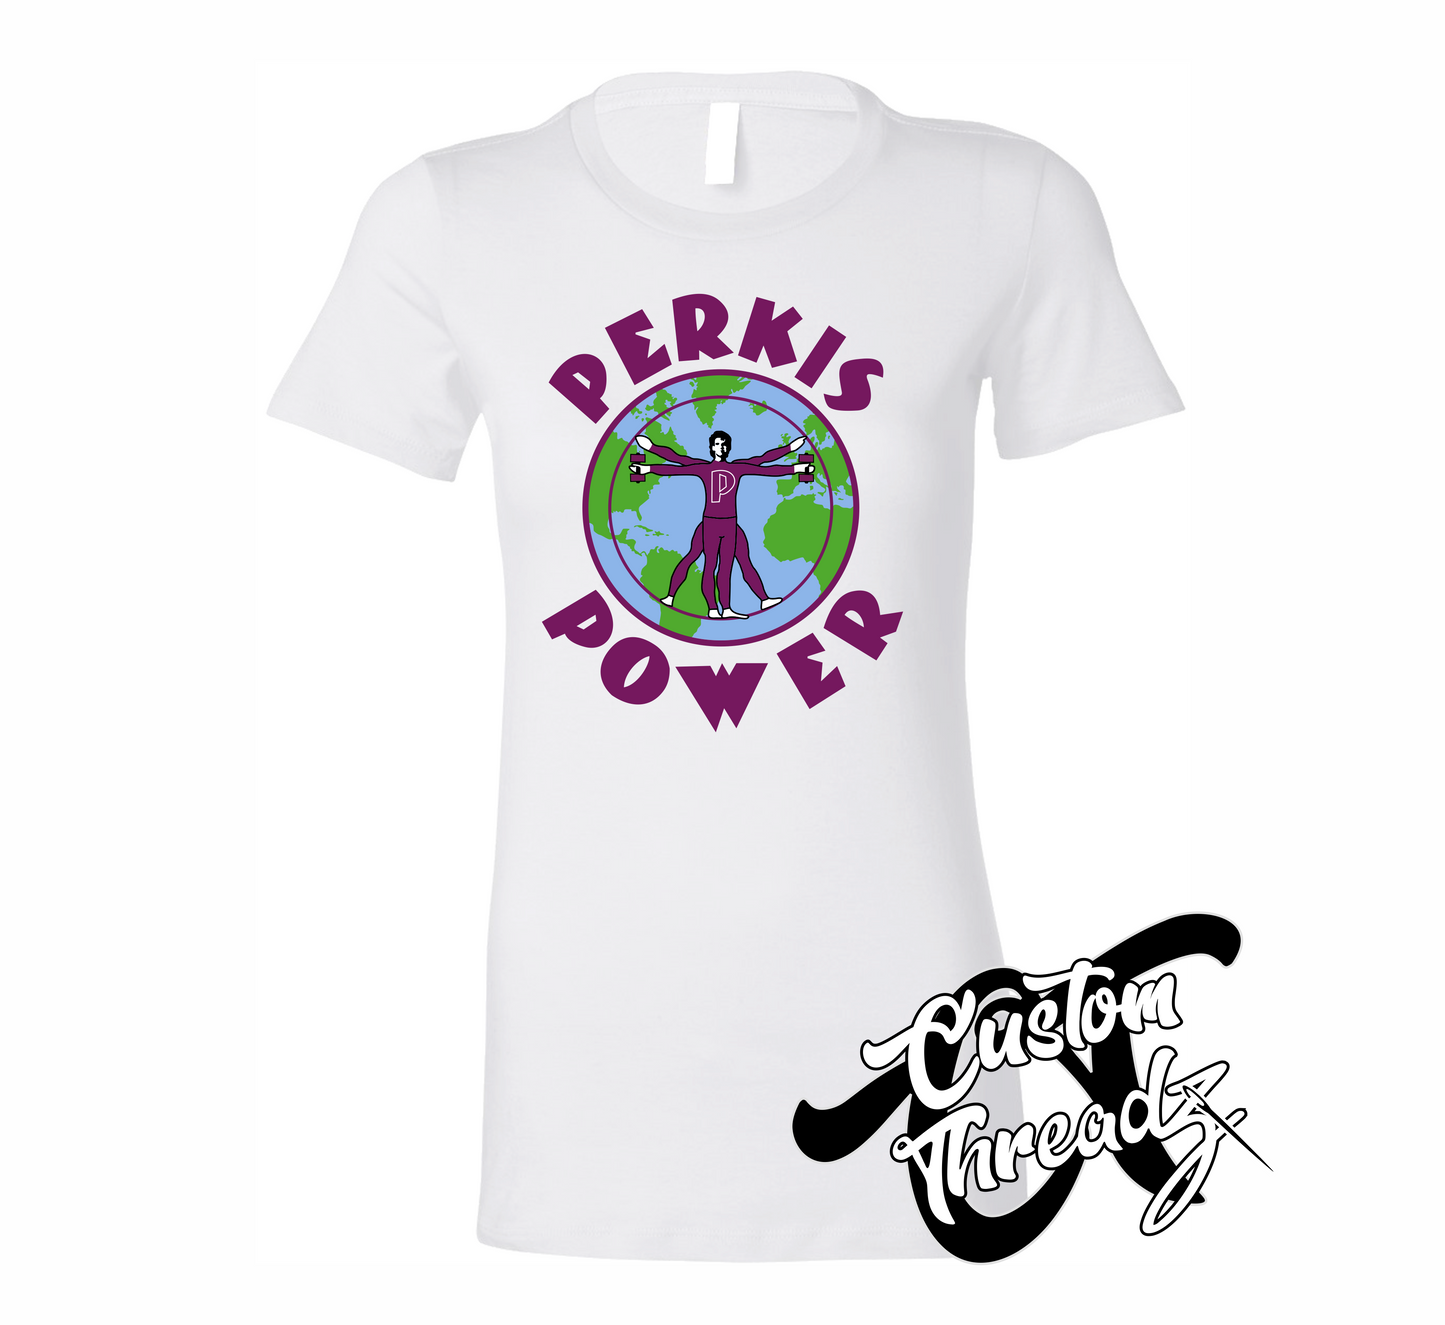 white womens tee with perkis power heavyweights DTG printed design